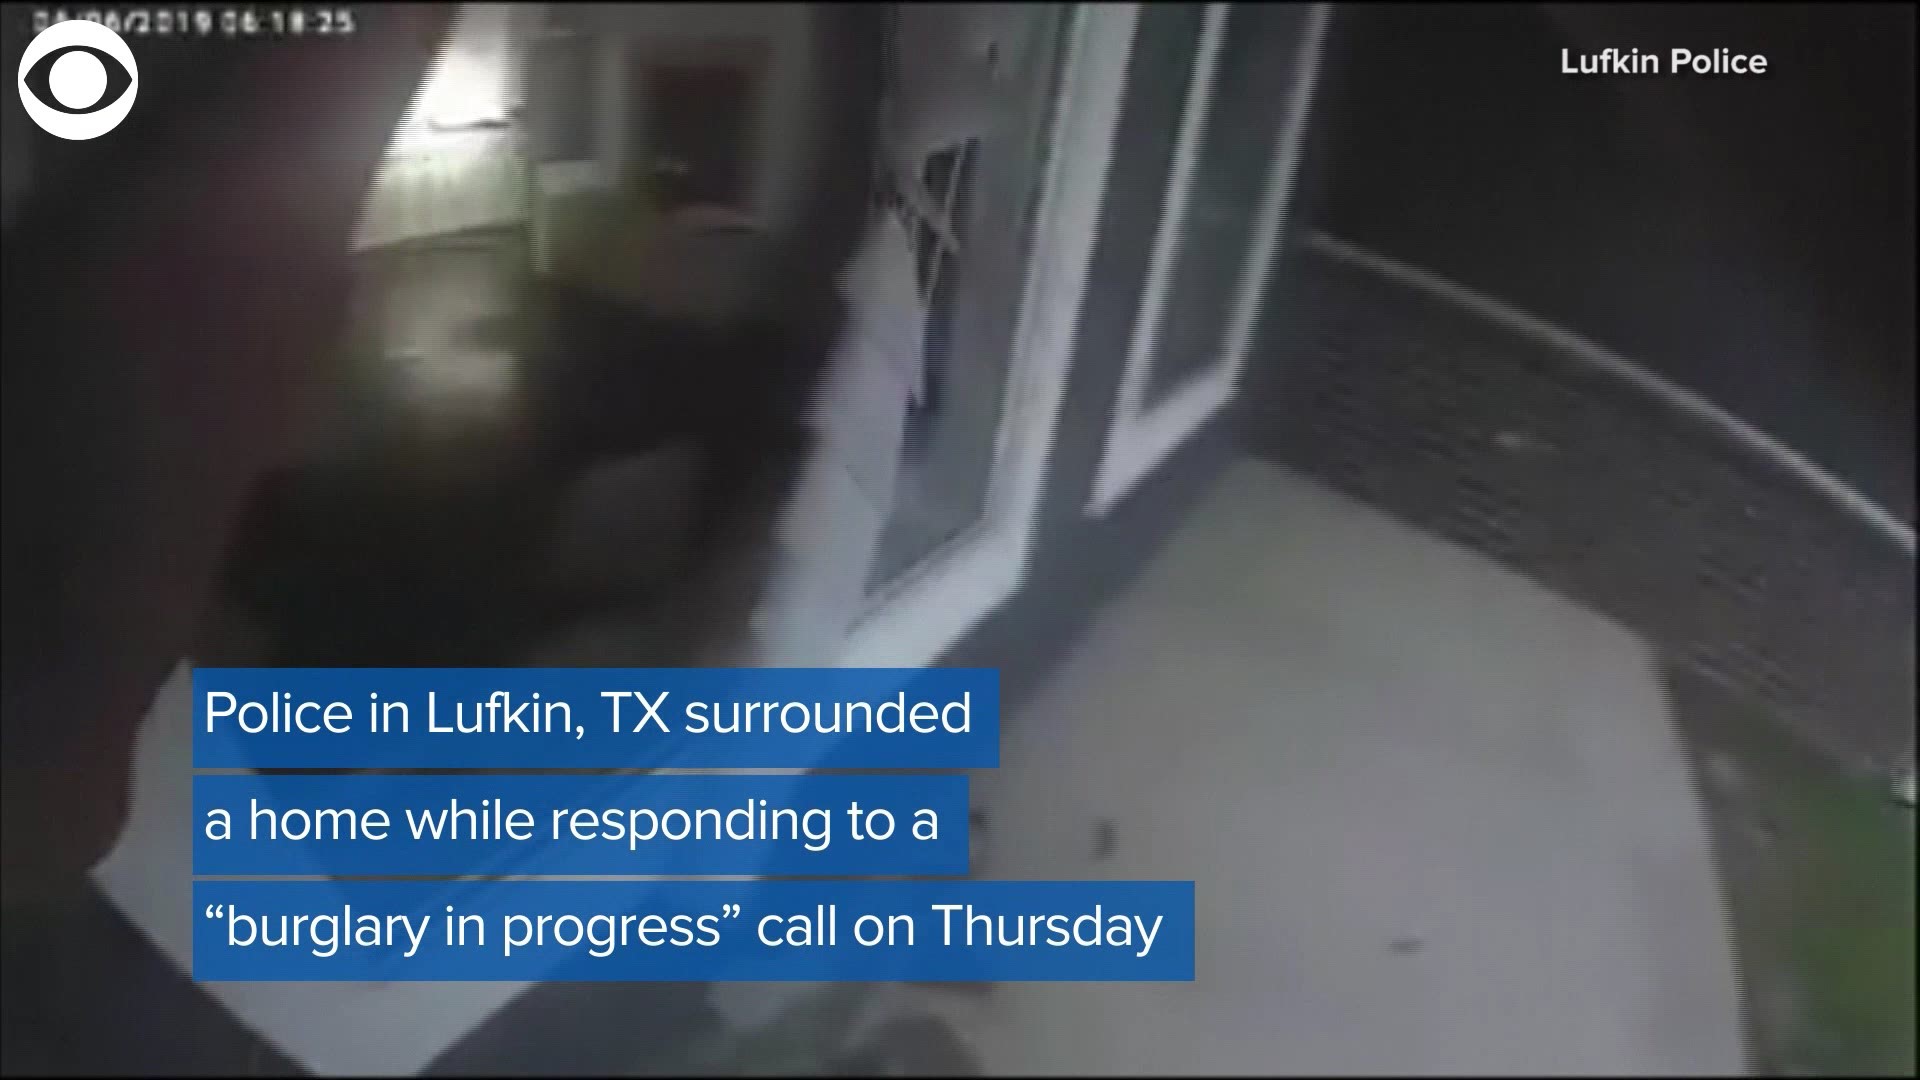 Police Officers in Lufkin, TX responded to a call about a home break-in on Thursday. Investigators said the homeowner hid in a closet after hearing glass breaking. Turn out it was a deer.